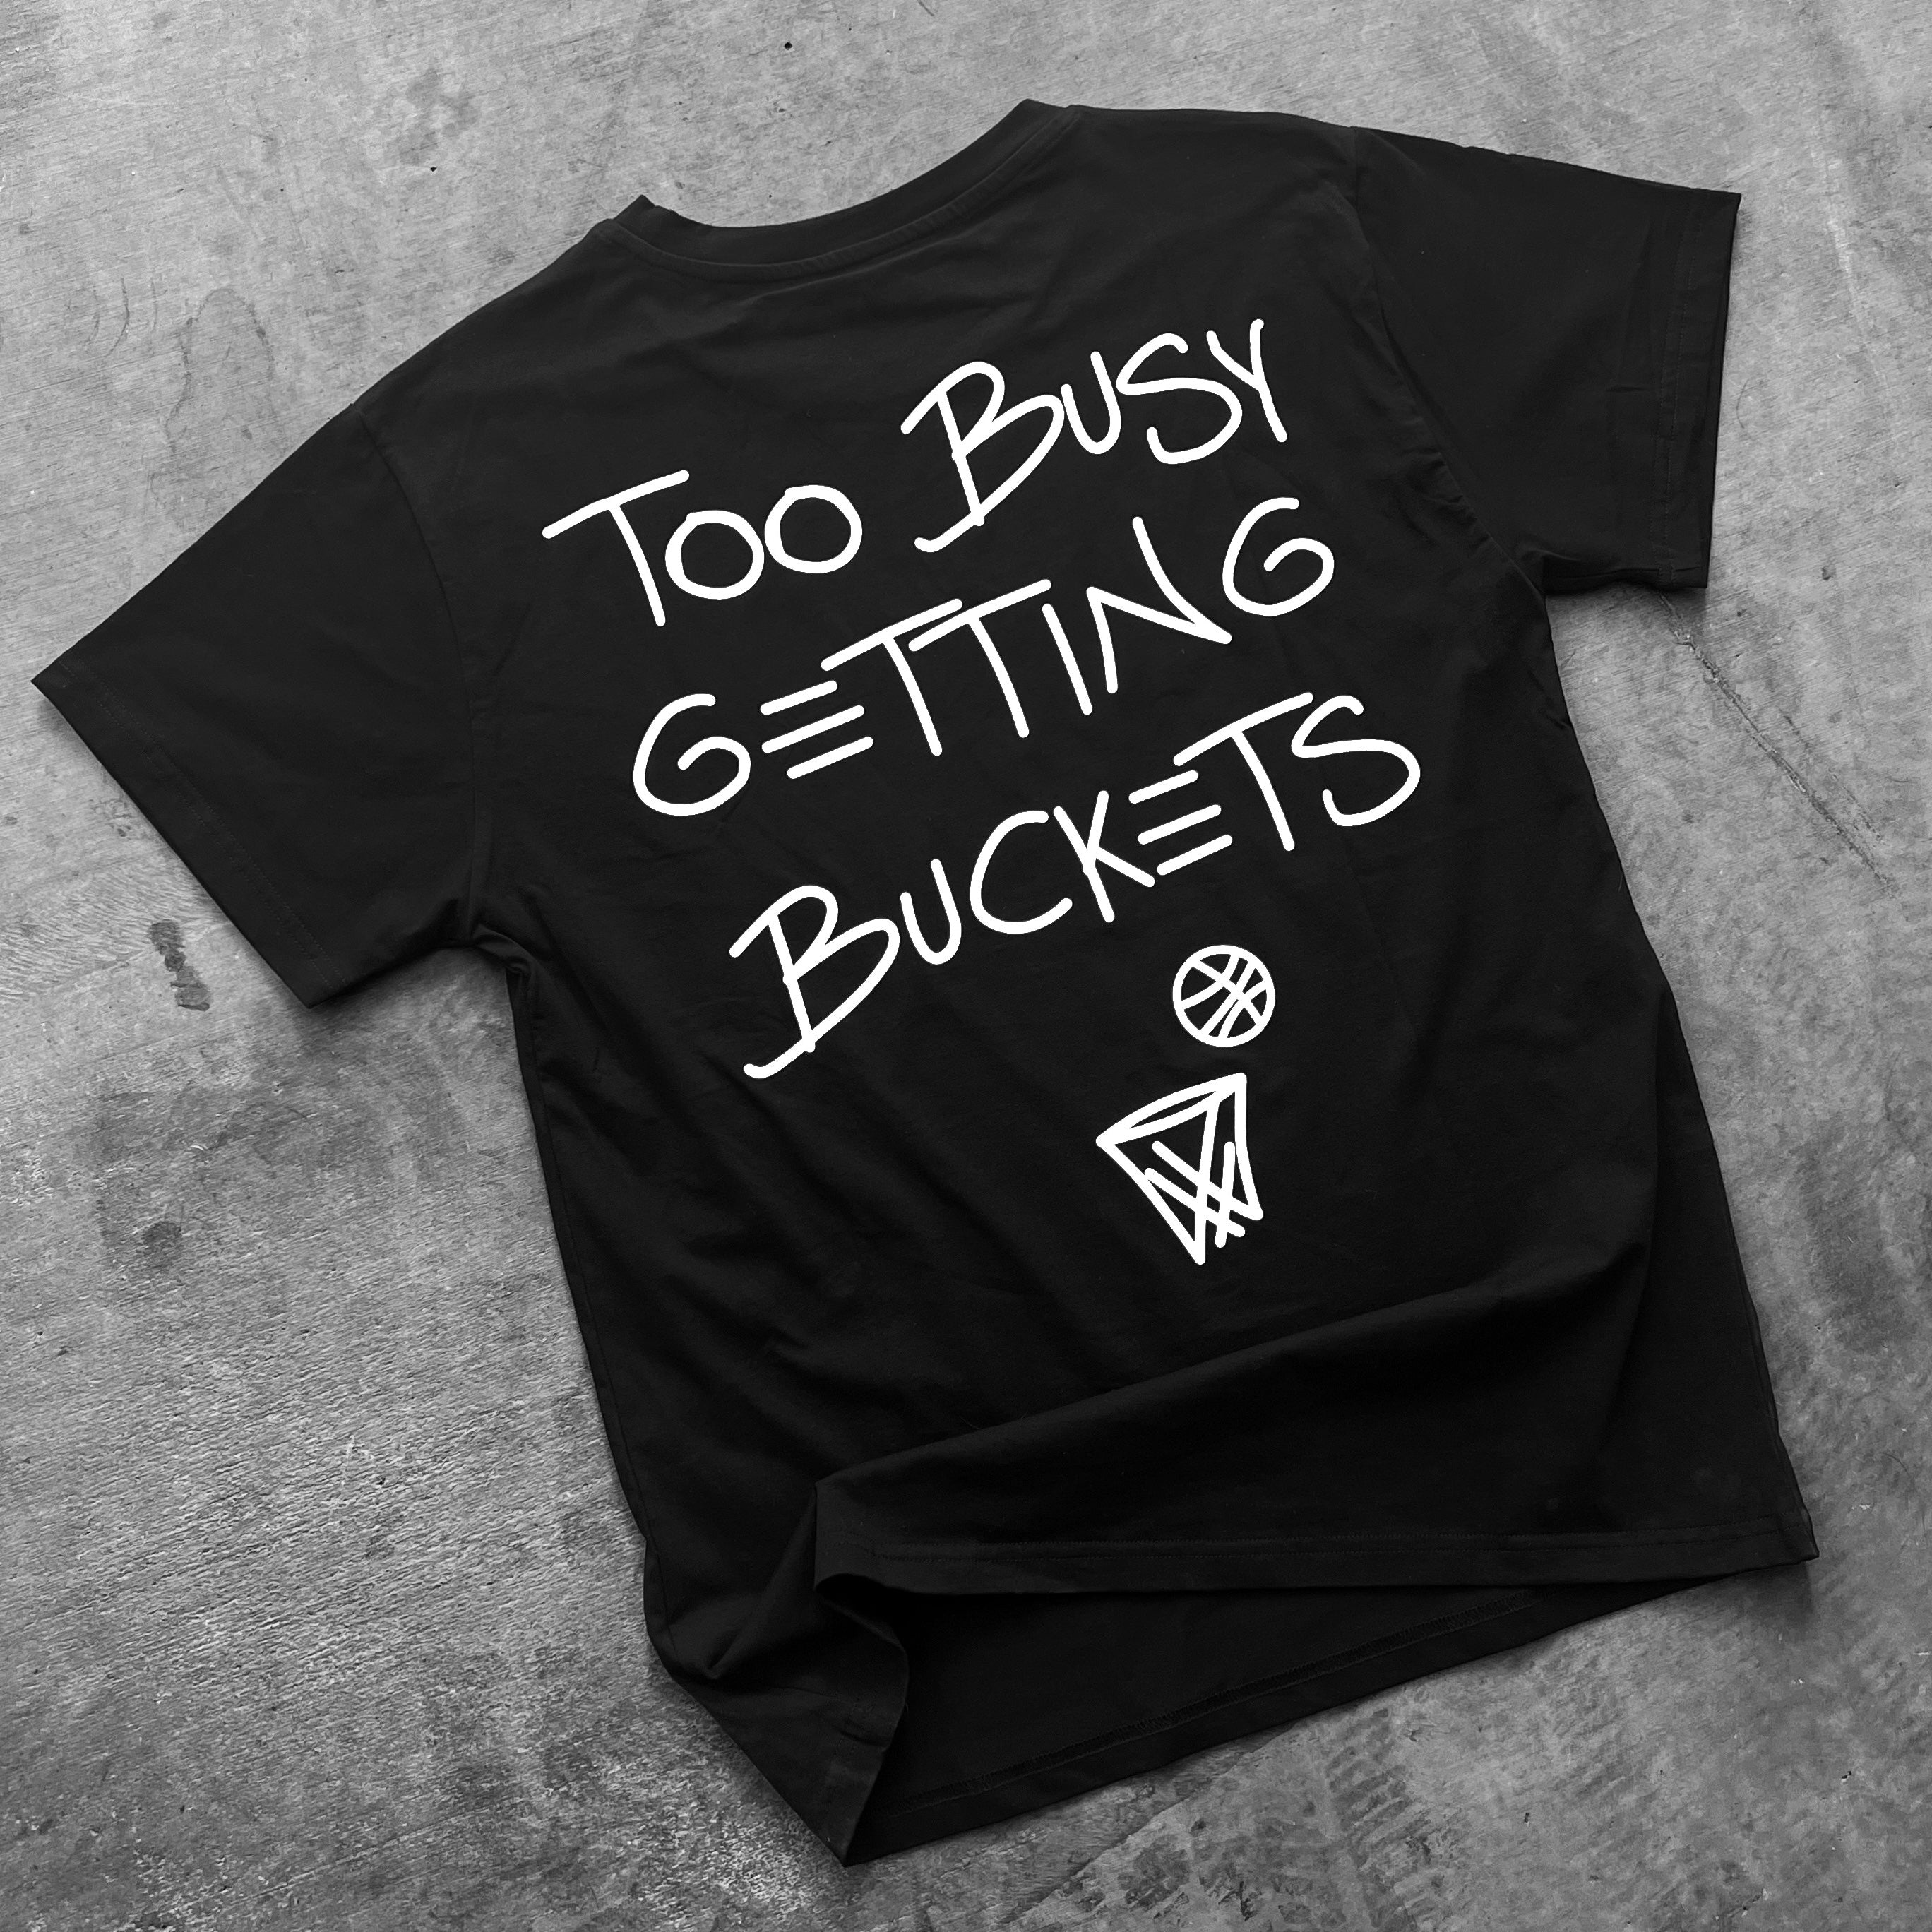 Too Busy Getting Buckets T-Shirt - Youth - Black